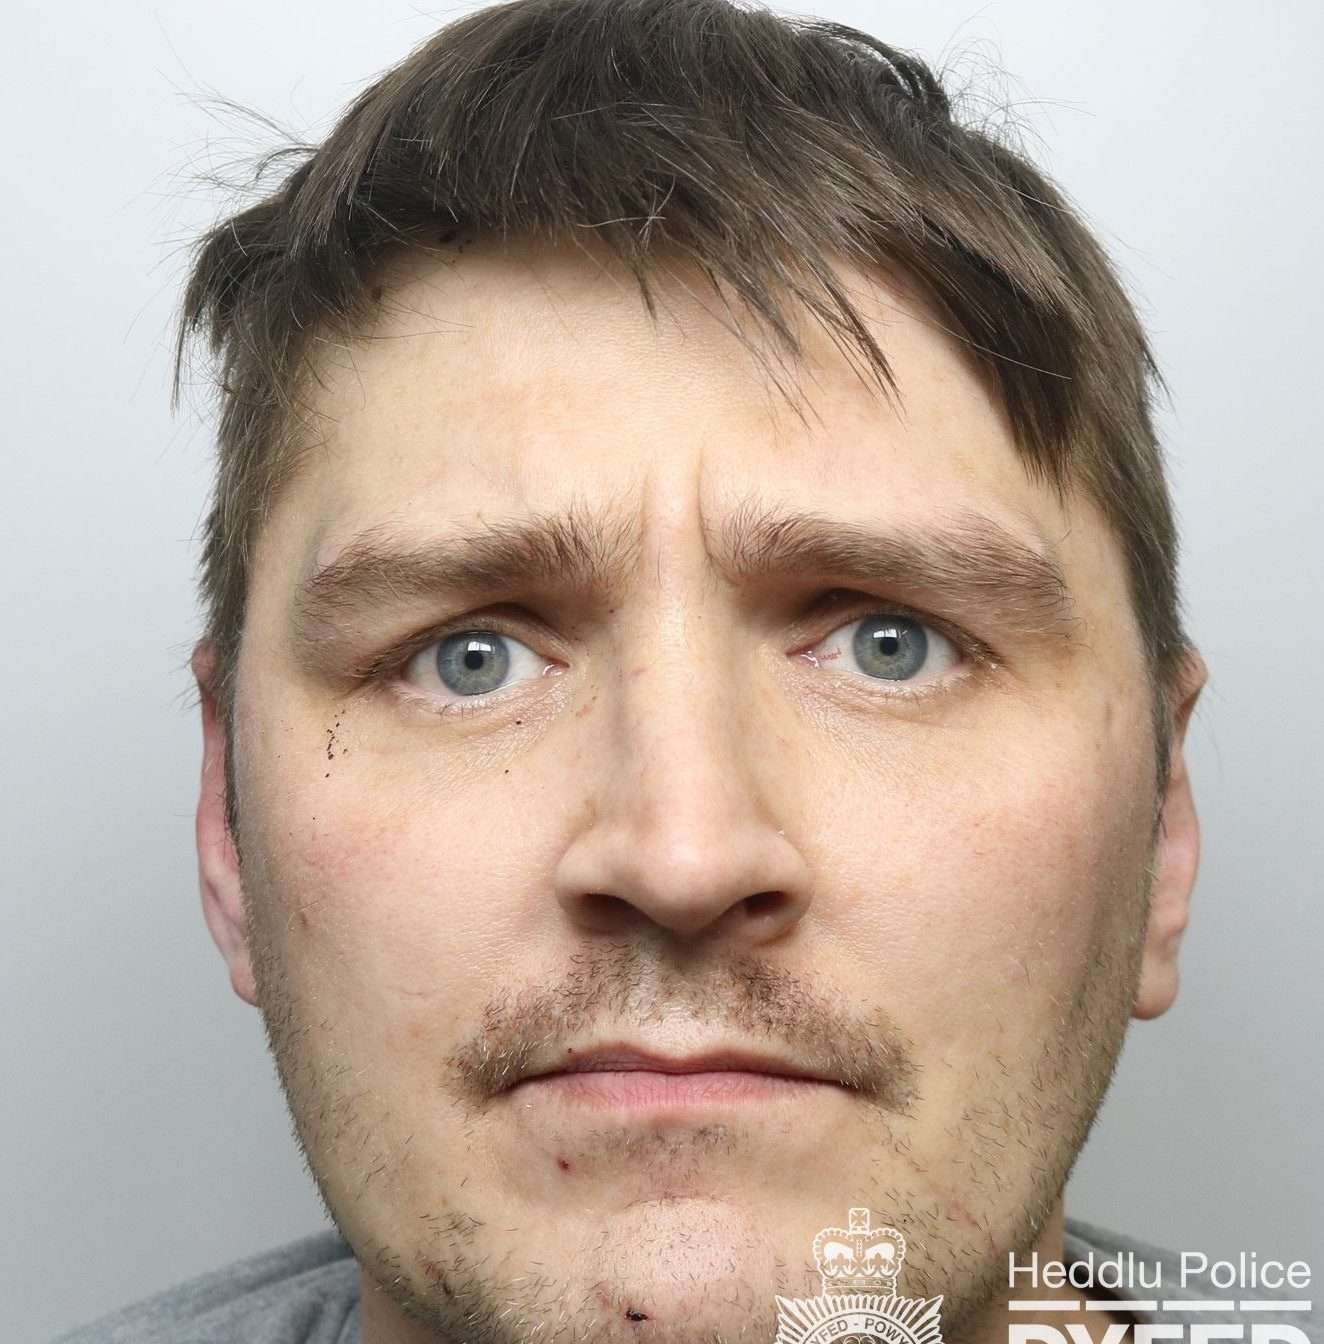 Man wanted for breach of court order and assault